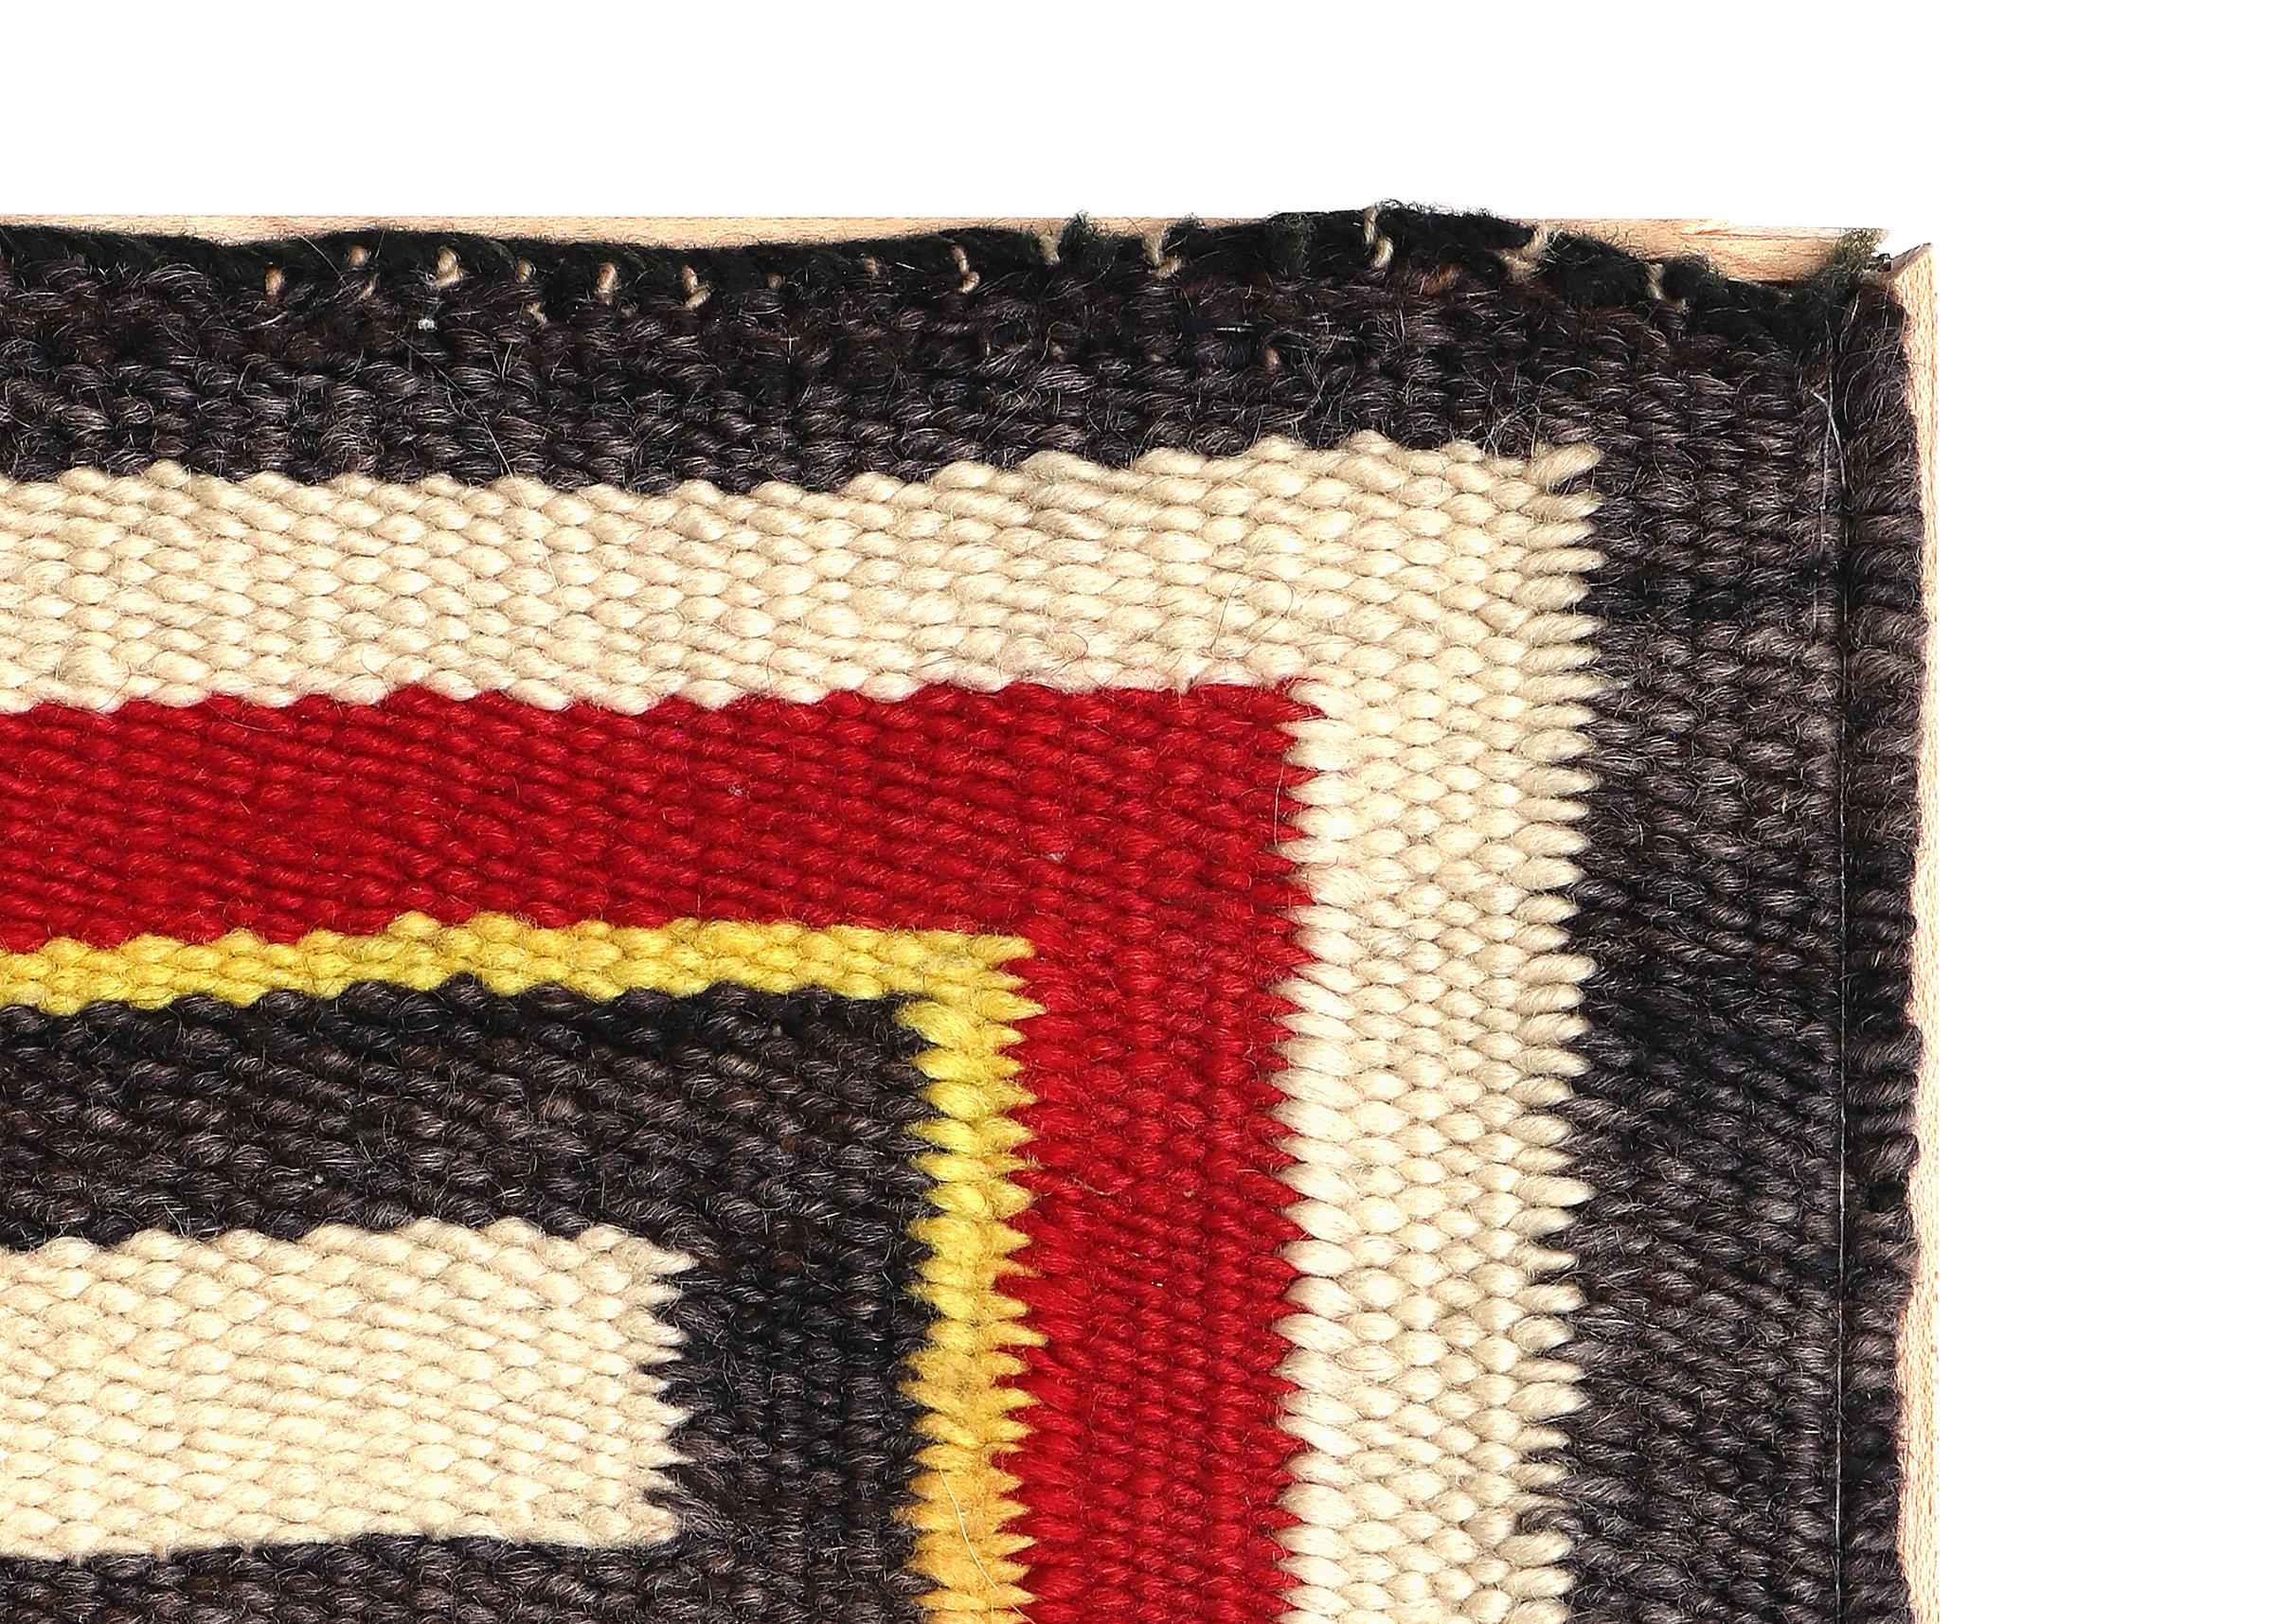 Mounted circa 1940s Navajo Weaving from the Trading Post Era. Seen is a stylized border with four airplane like central images and various male torsos with hats. Woven of native hand spun wool in colors of reds, yellows, blues, dark brown/black,